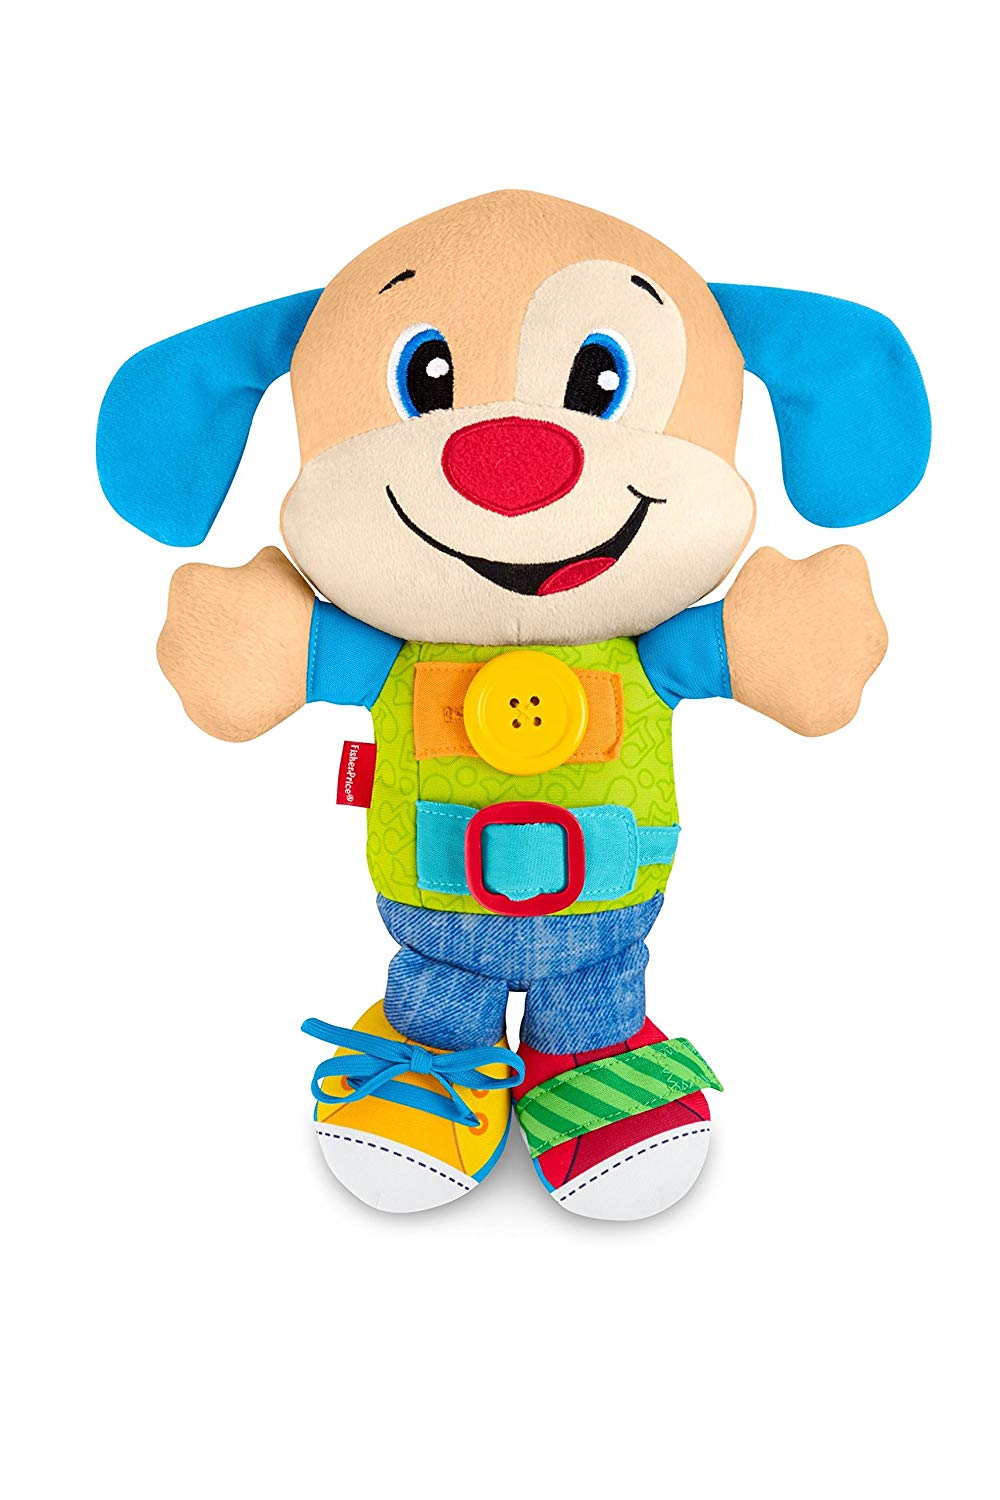 Fisher Price – Plush Dog Vísteme And Learn